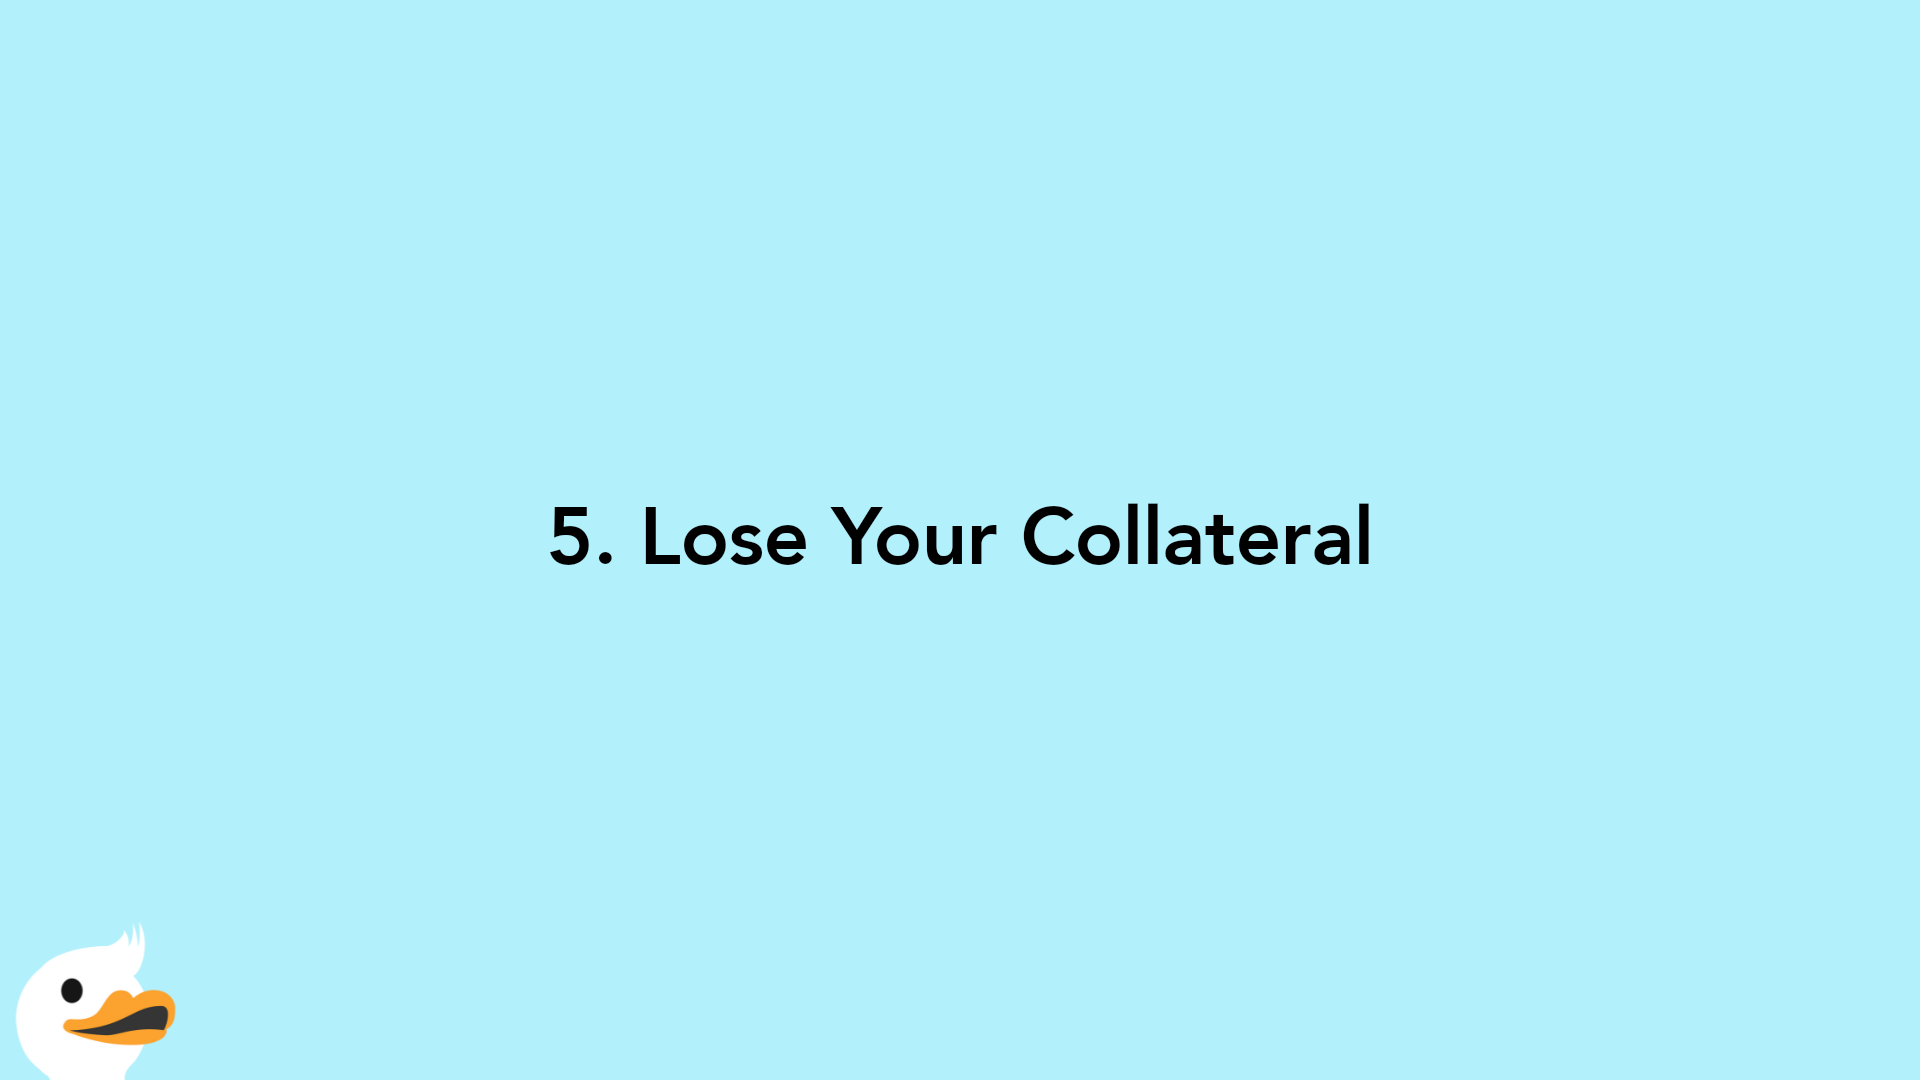 5. Lose Your Collateral